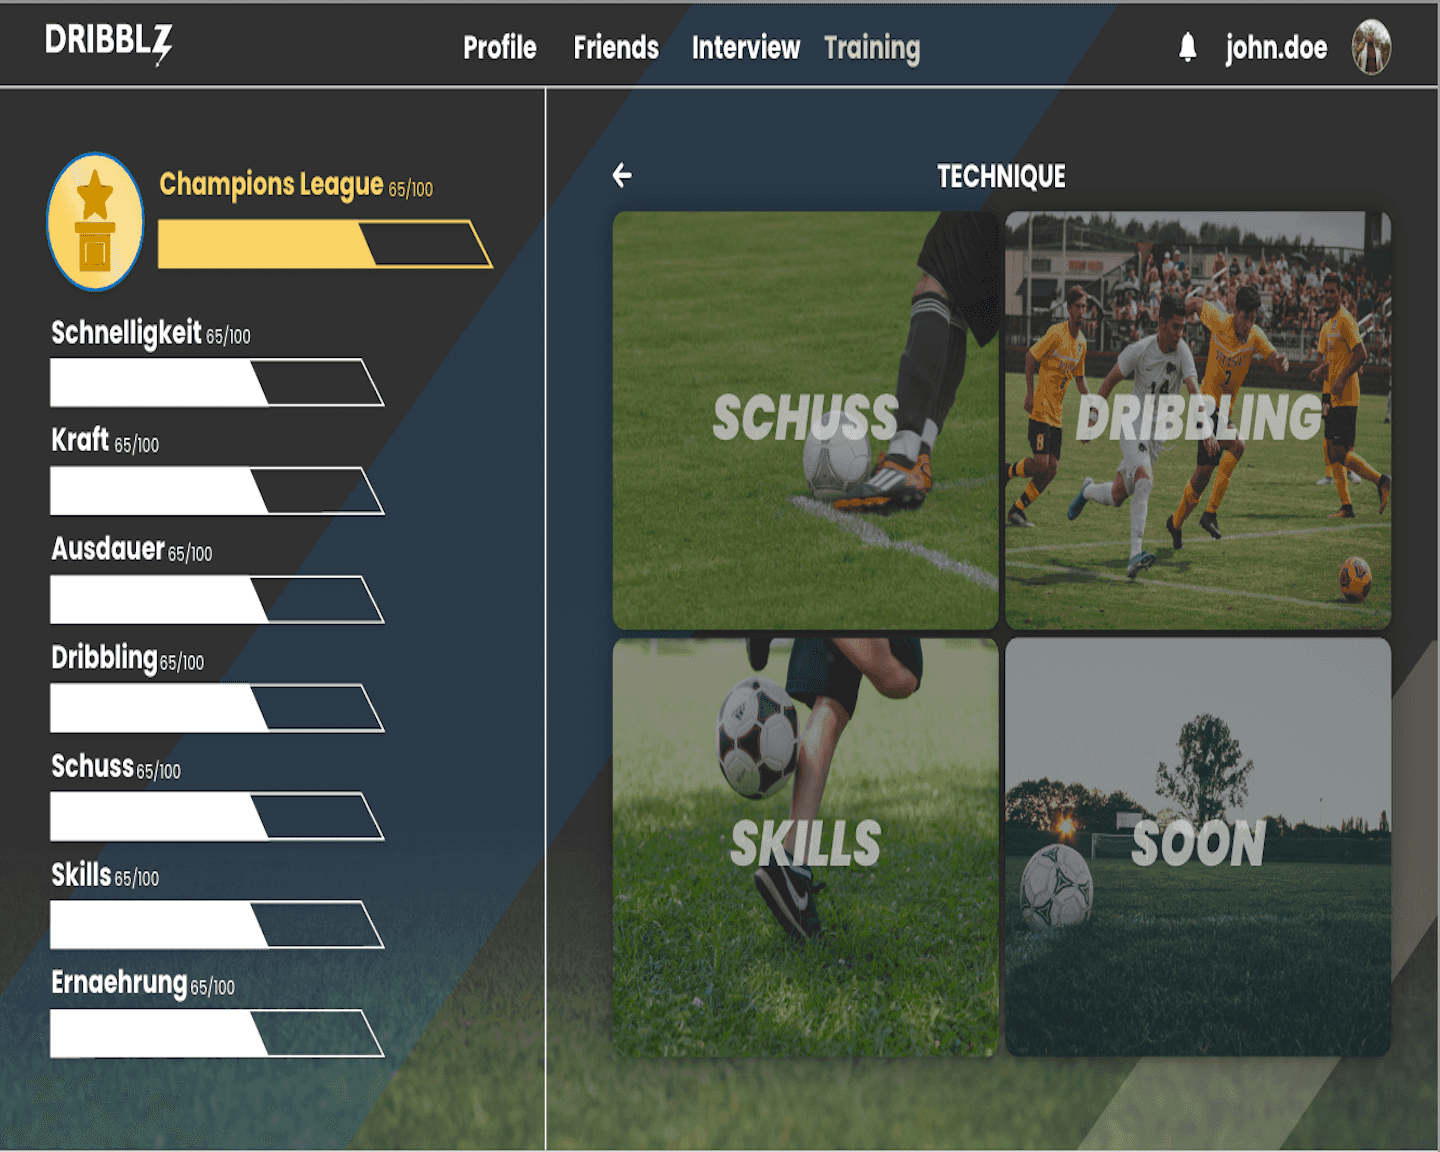 picture of the training section of the dribblz web-app